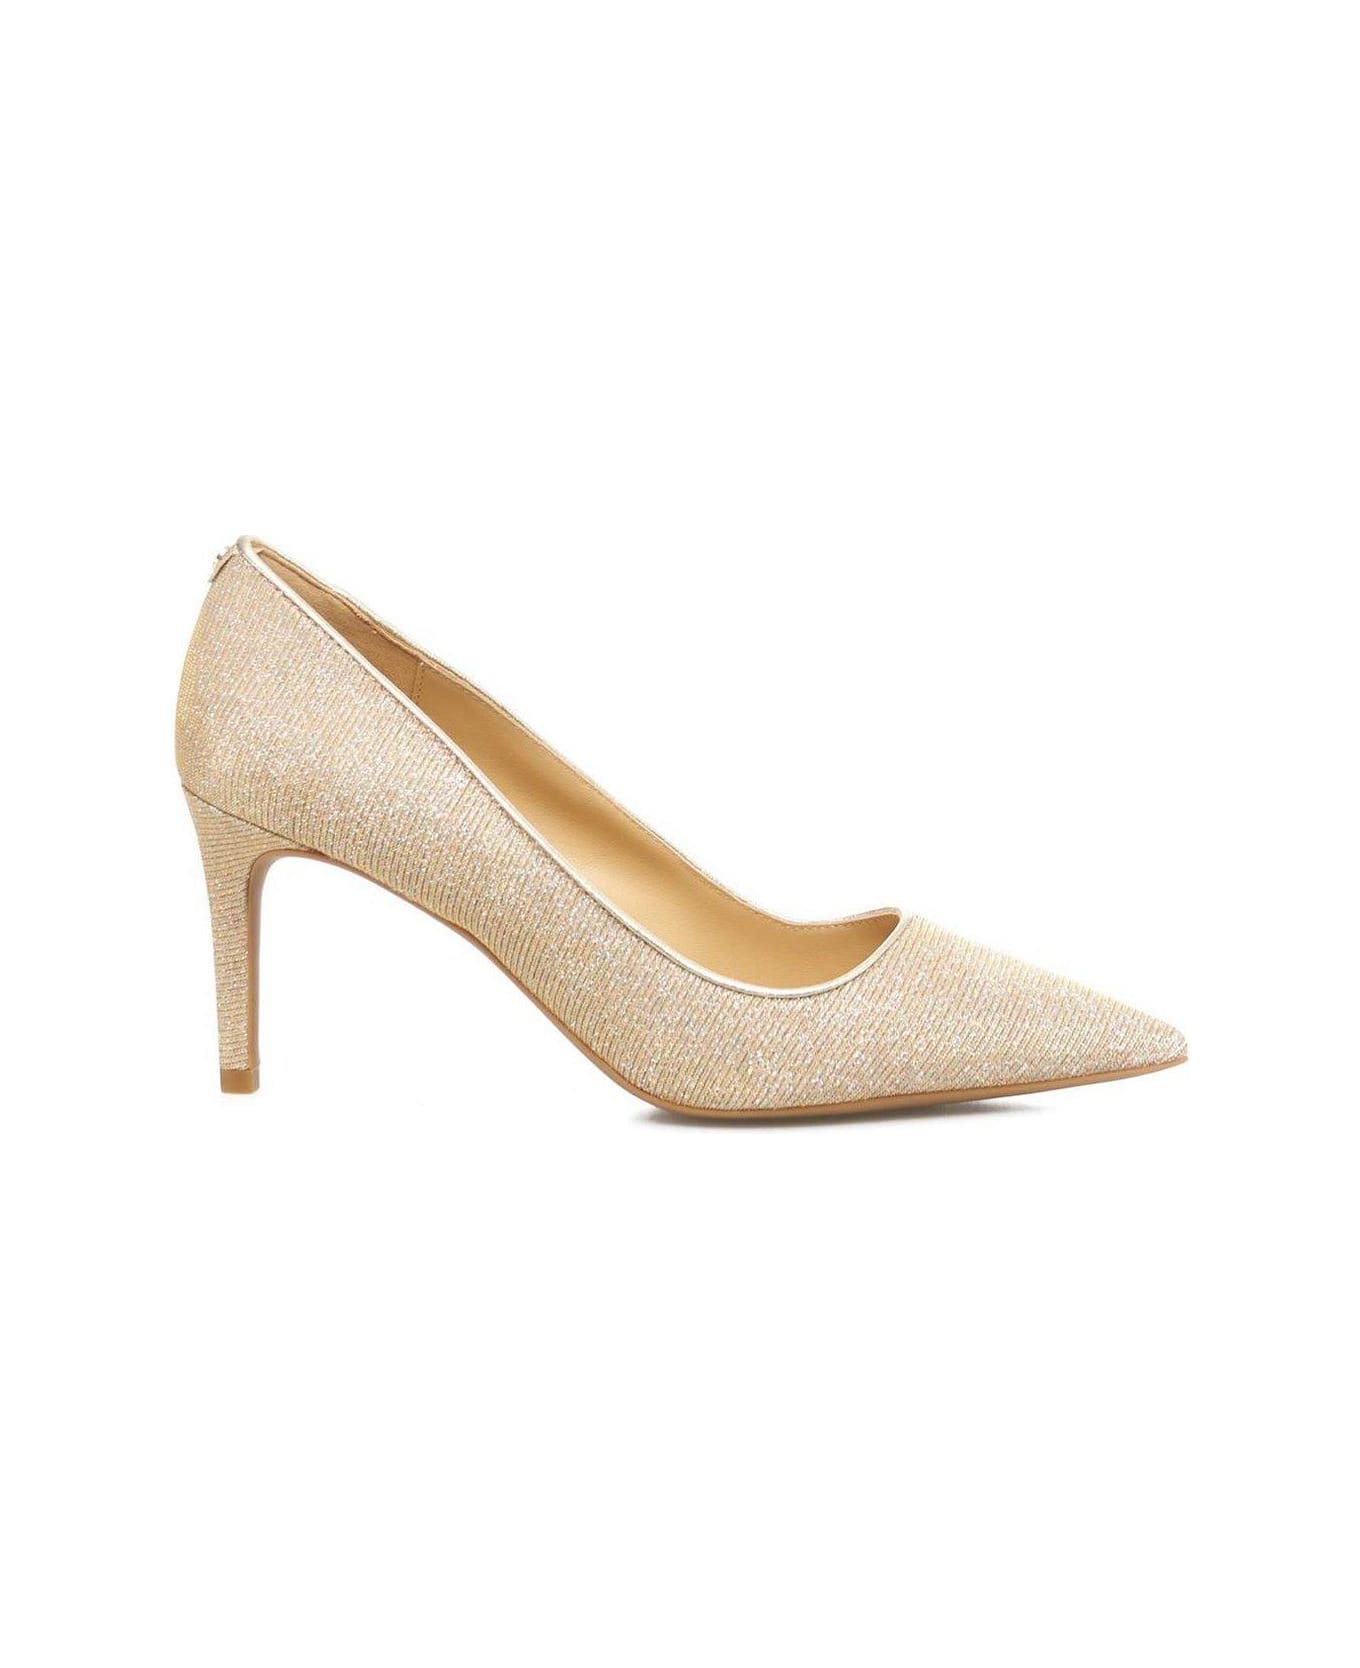 Michael Kors Collection Glittered Pointed Toe Pumps - Camel Multi